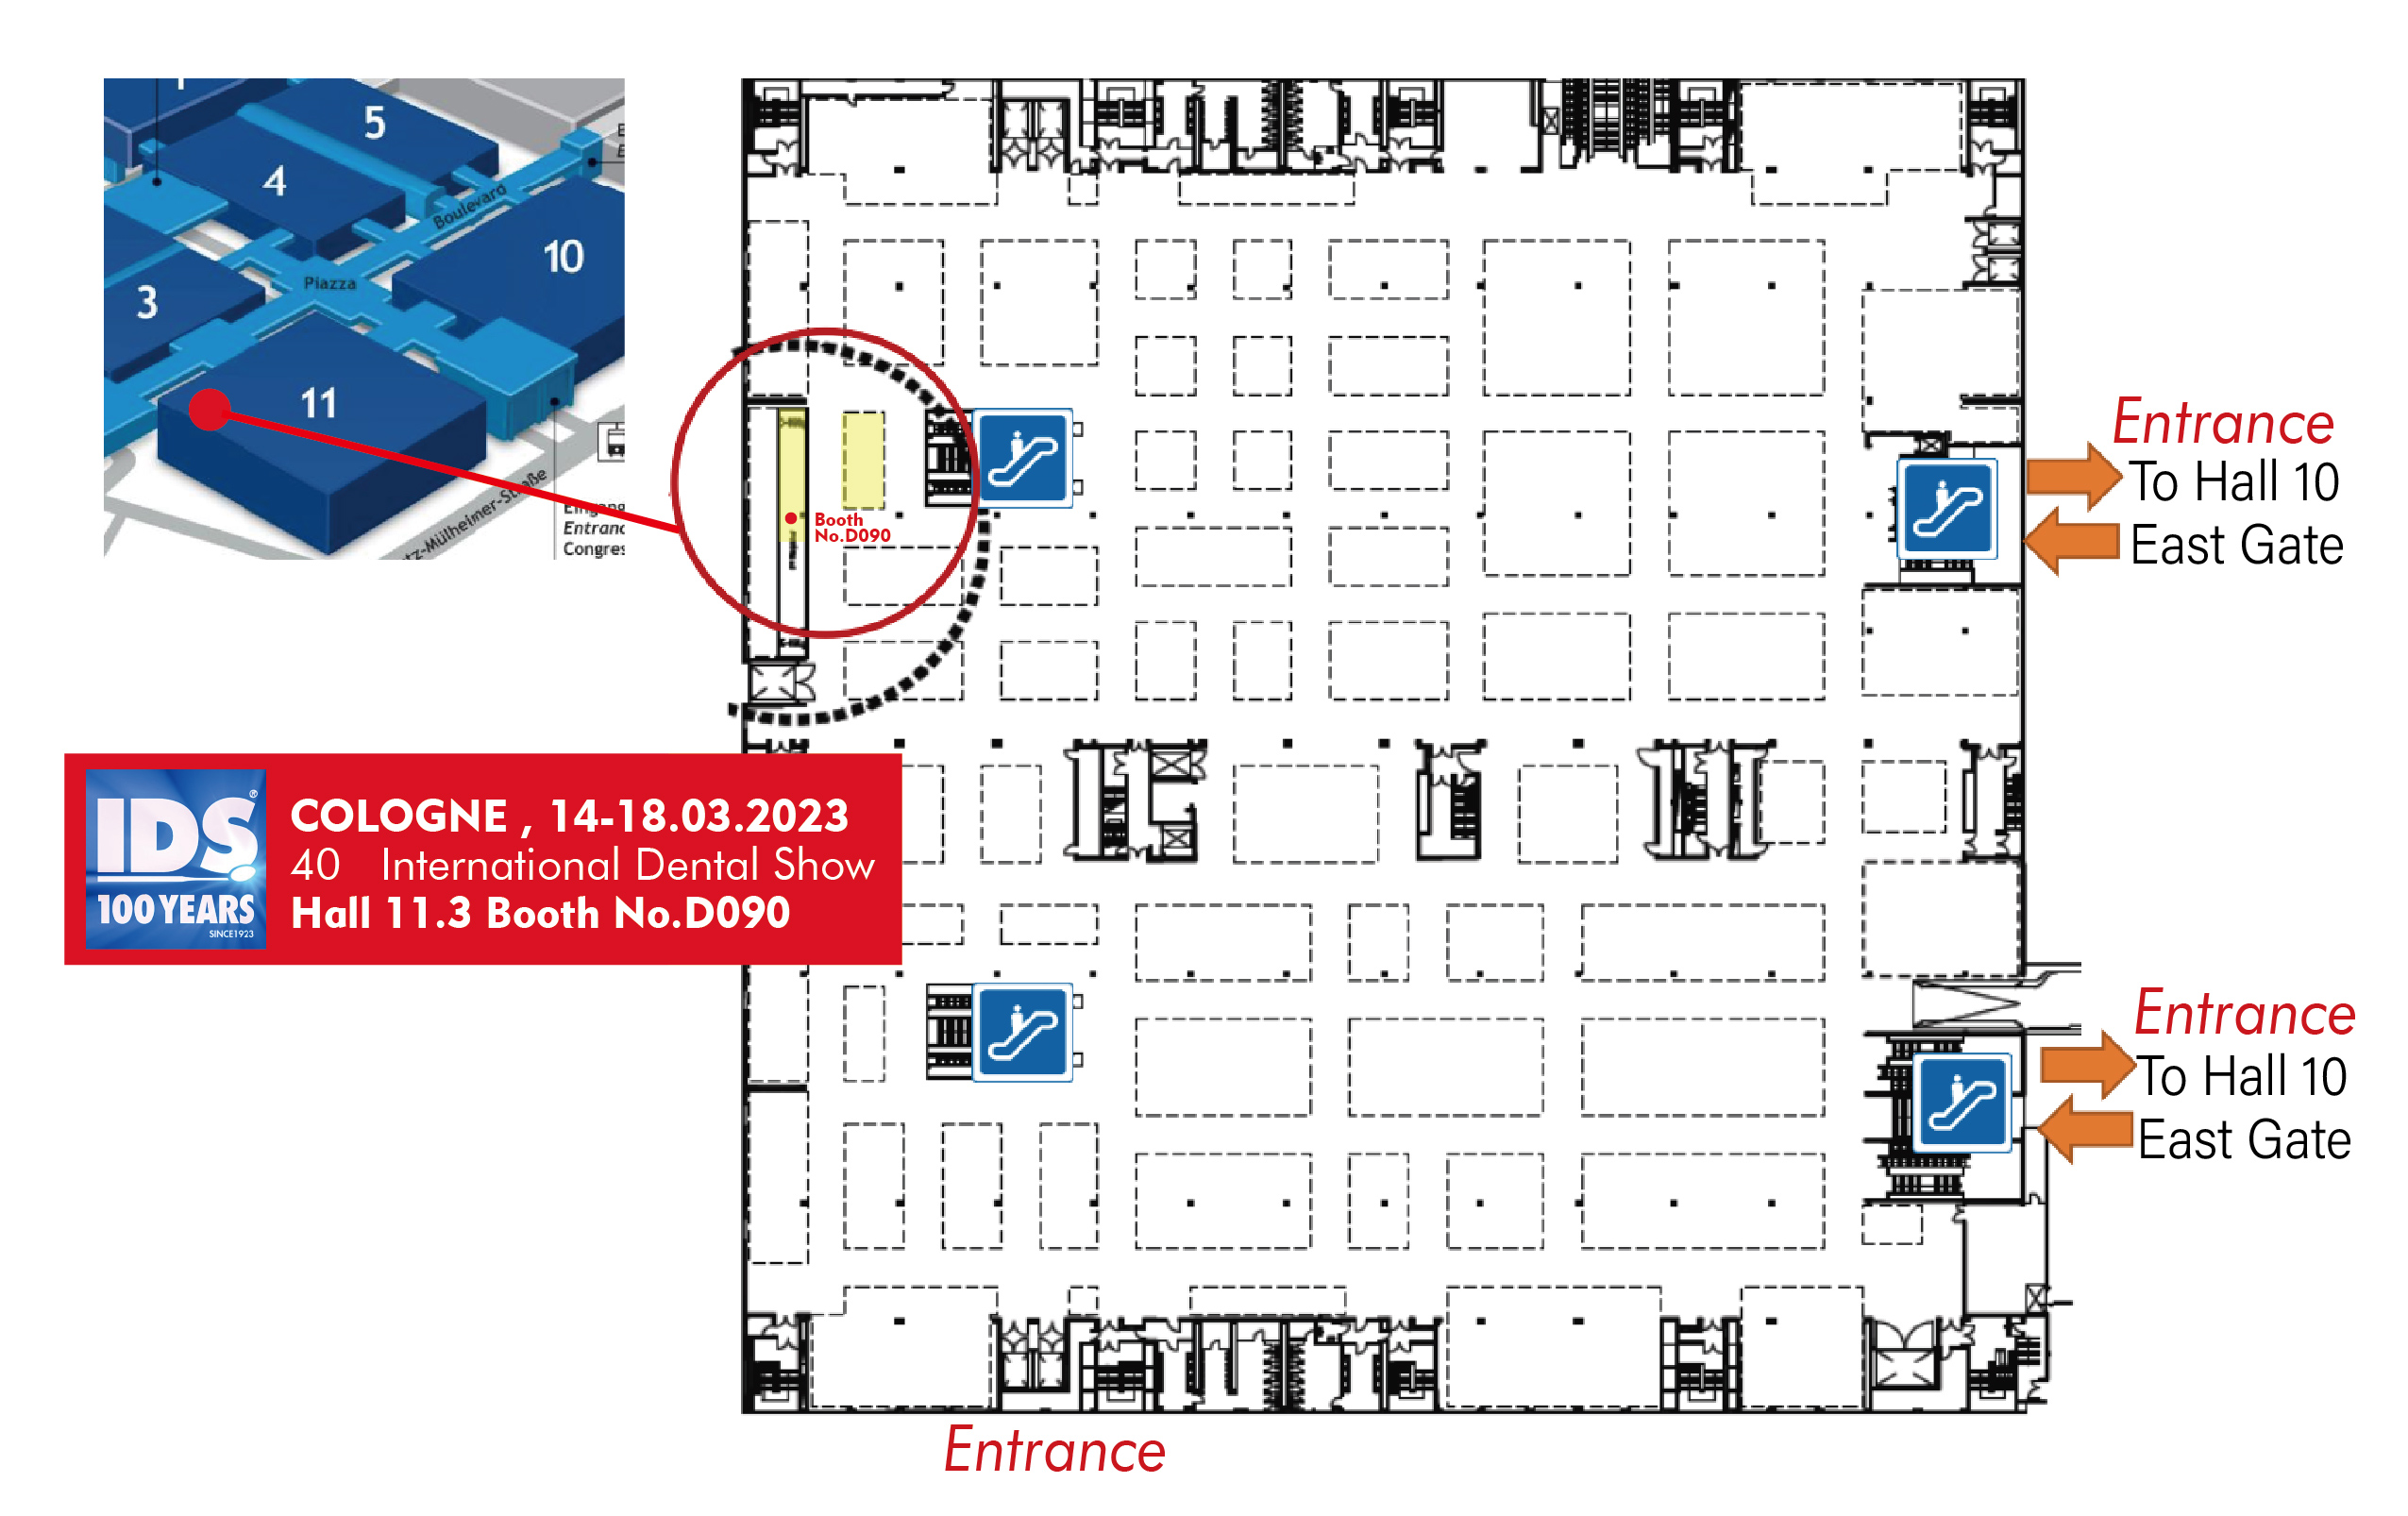 BiomateSWISS Team Booth location in Cologne International Dental Show